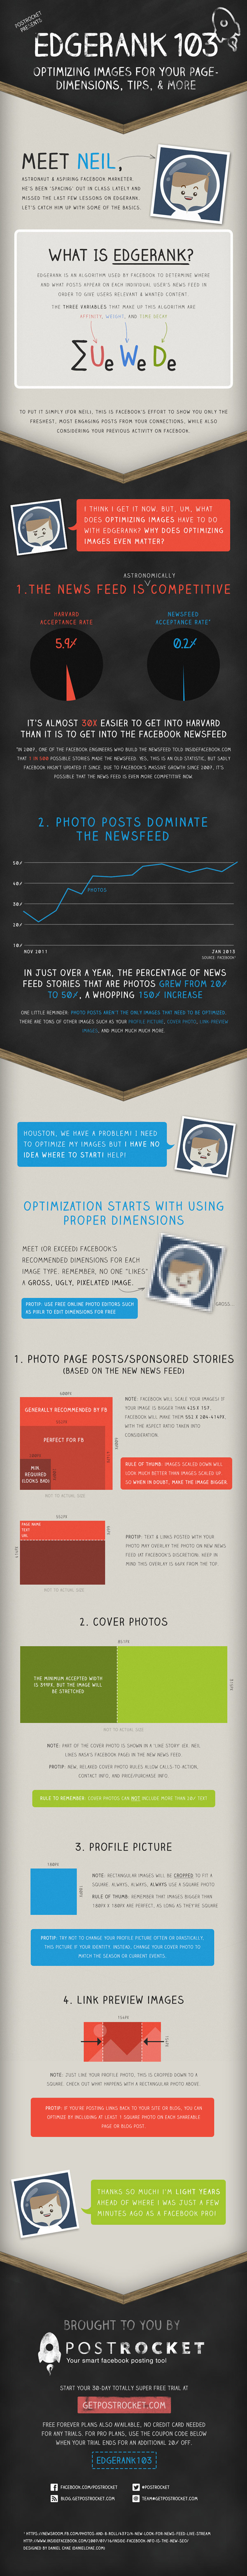 how_to_optimize_images_for_your_facebook_page